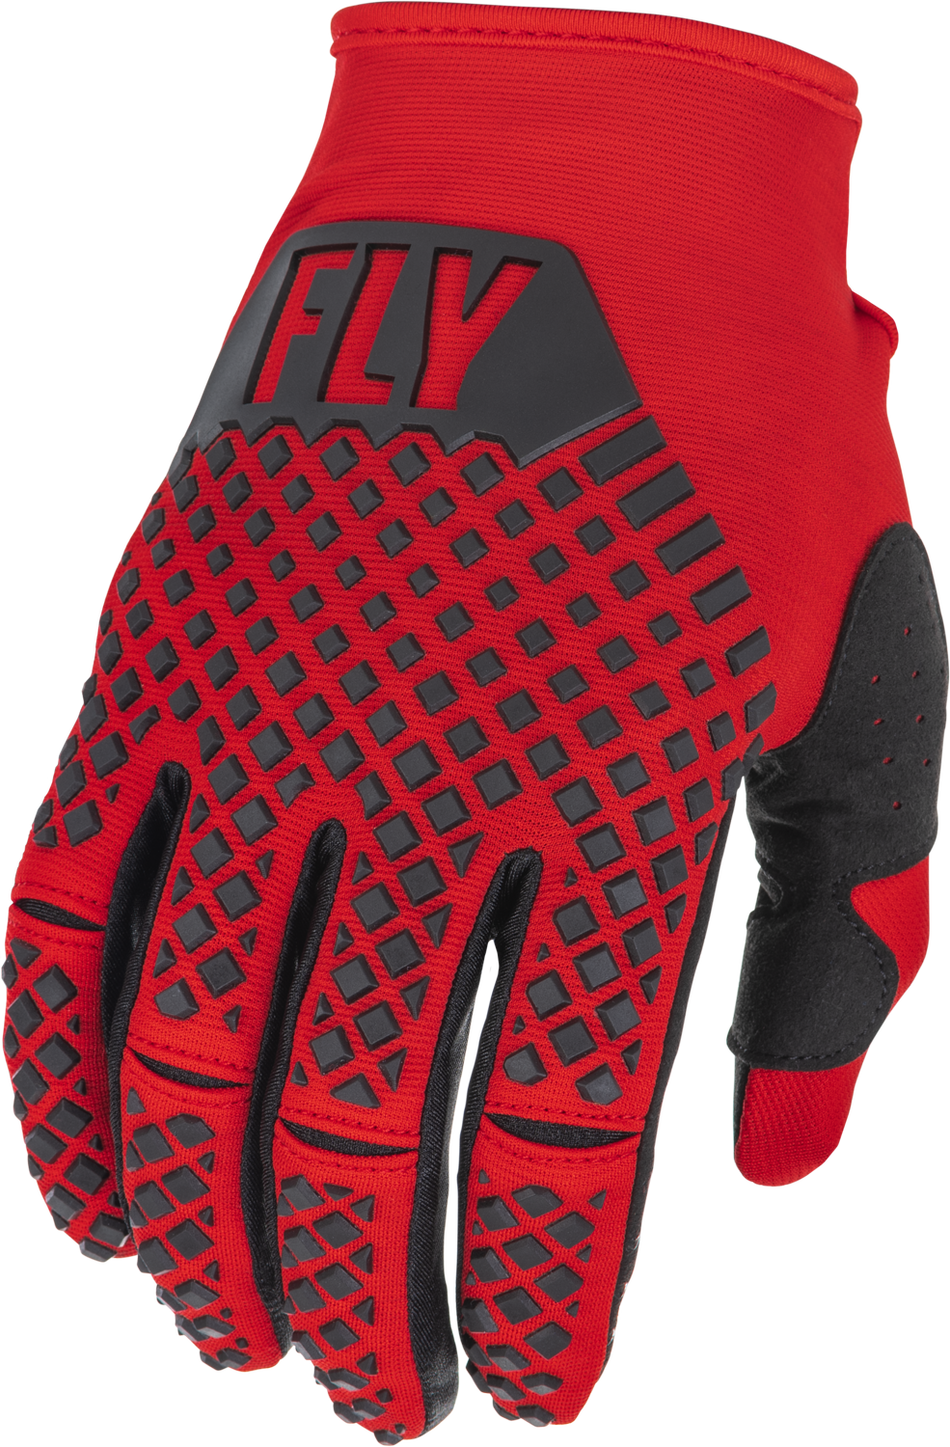 FLY RACING Youth Kinetic Gloves Red/Black Ys 375-413YS